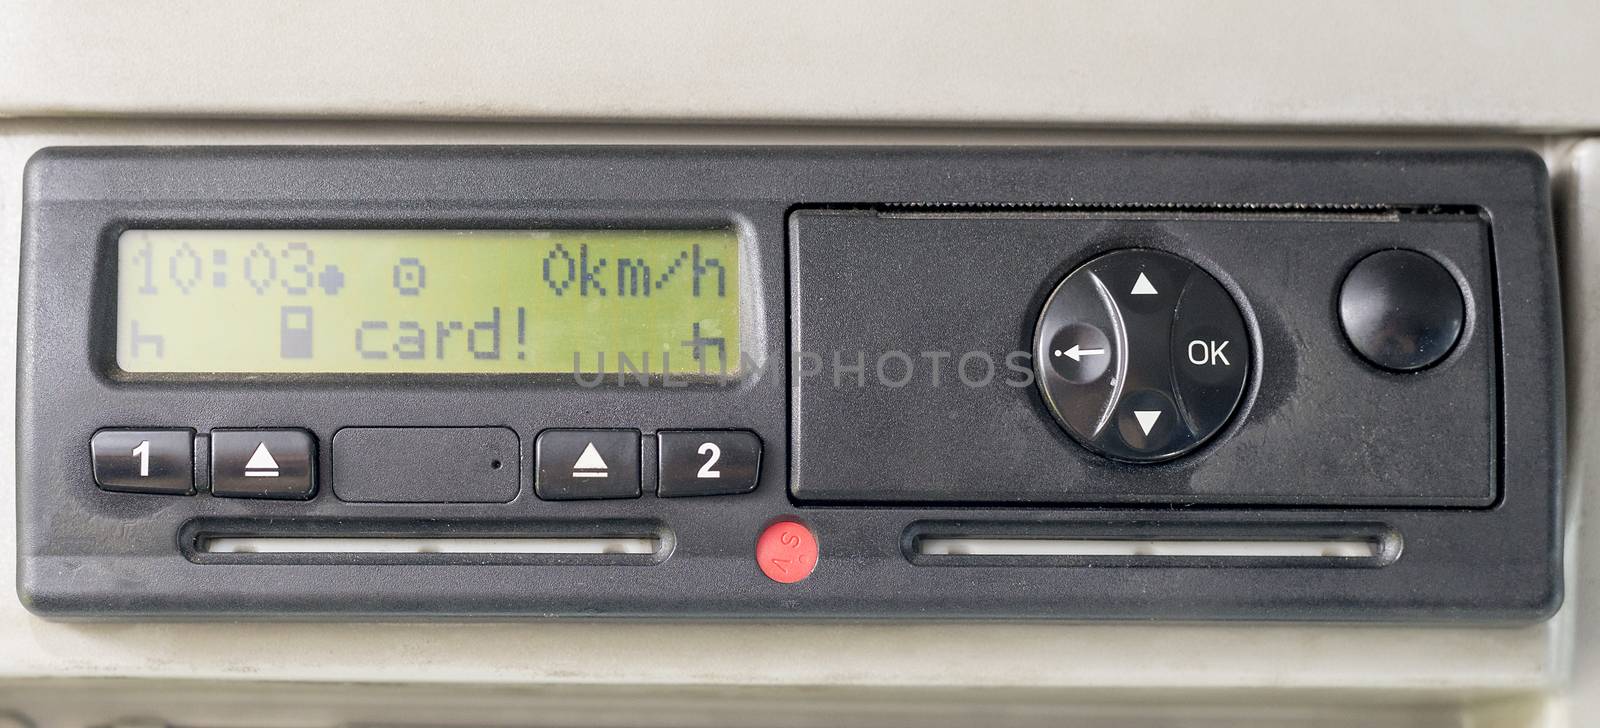 Digital tachograph display reads CARD . No inserted card in the device. Insert the drivers card. No personal data.